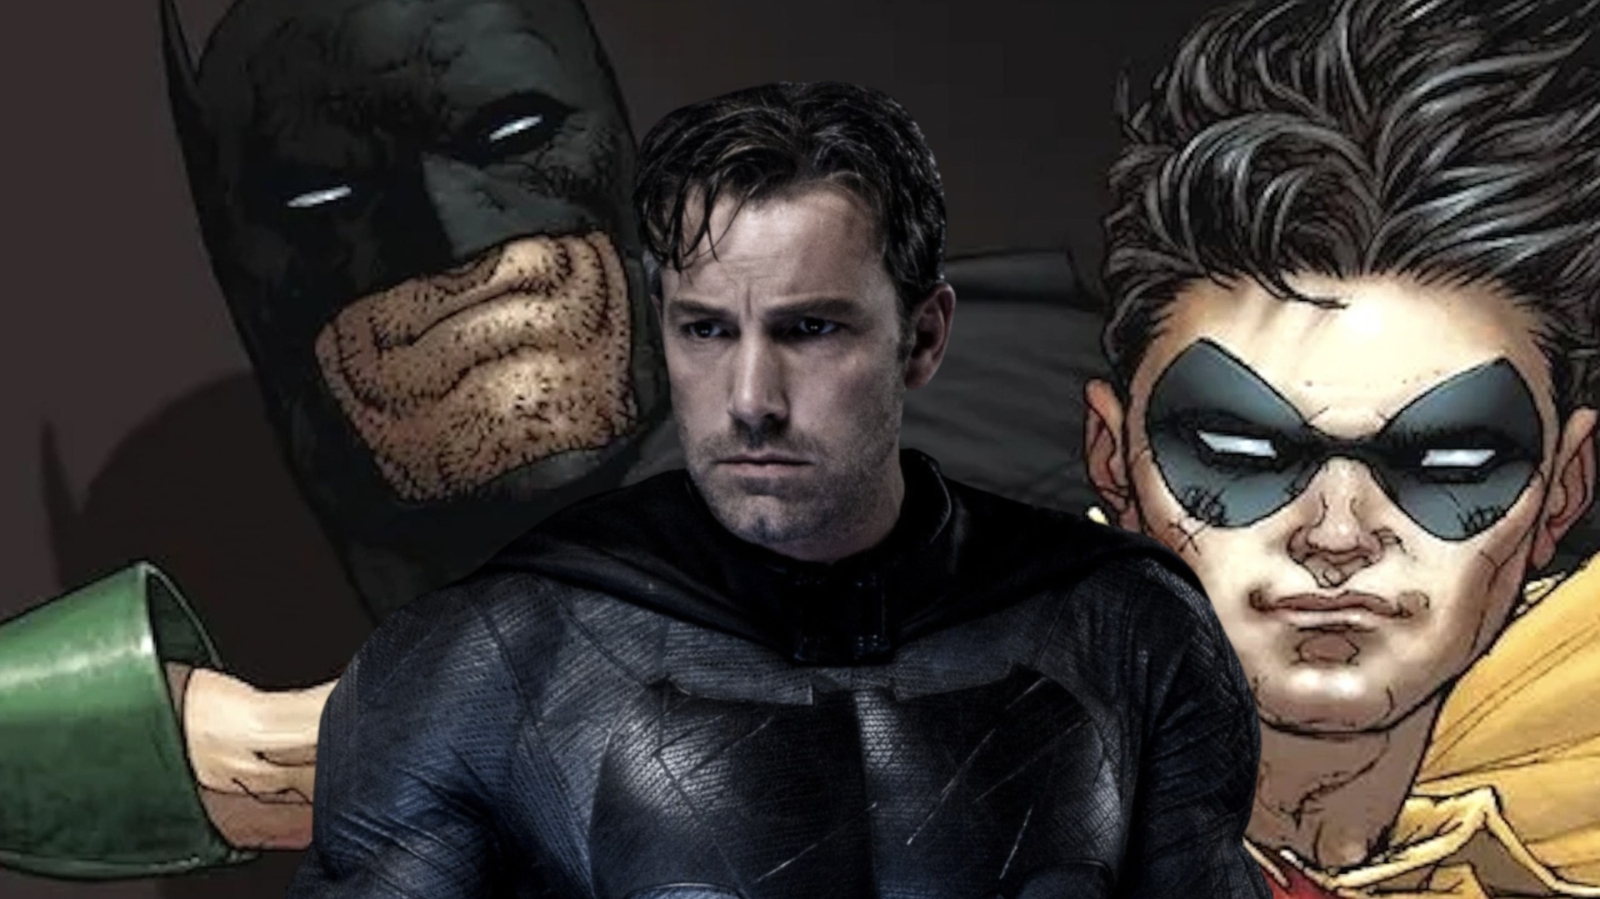 Ben Affleck rumored to direct DC Studios' Batman: The Brave and the Bold